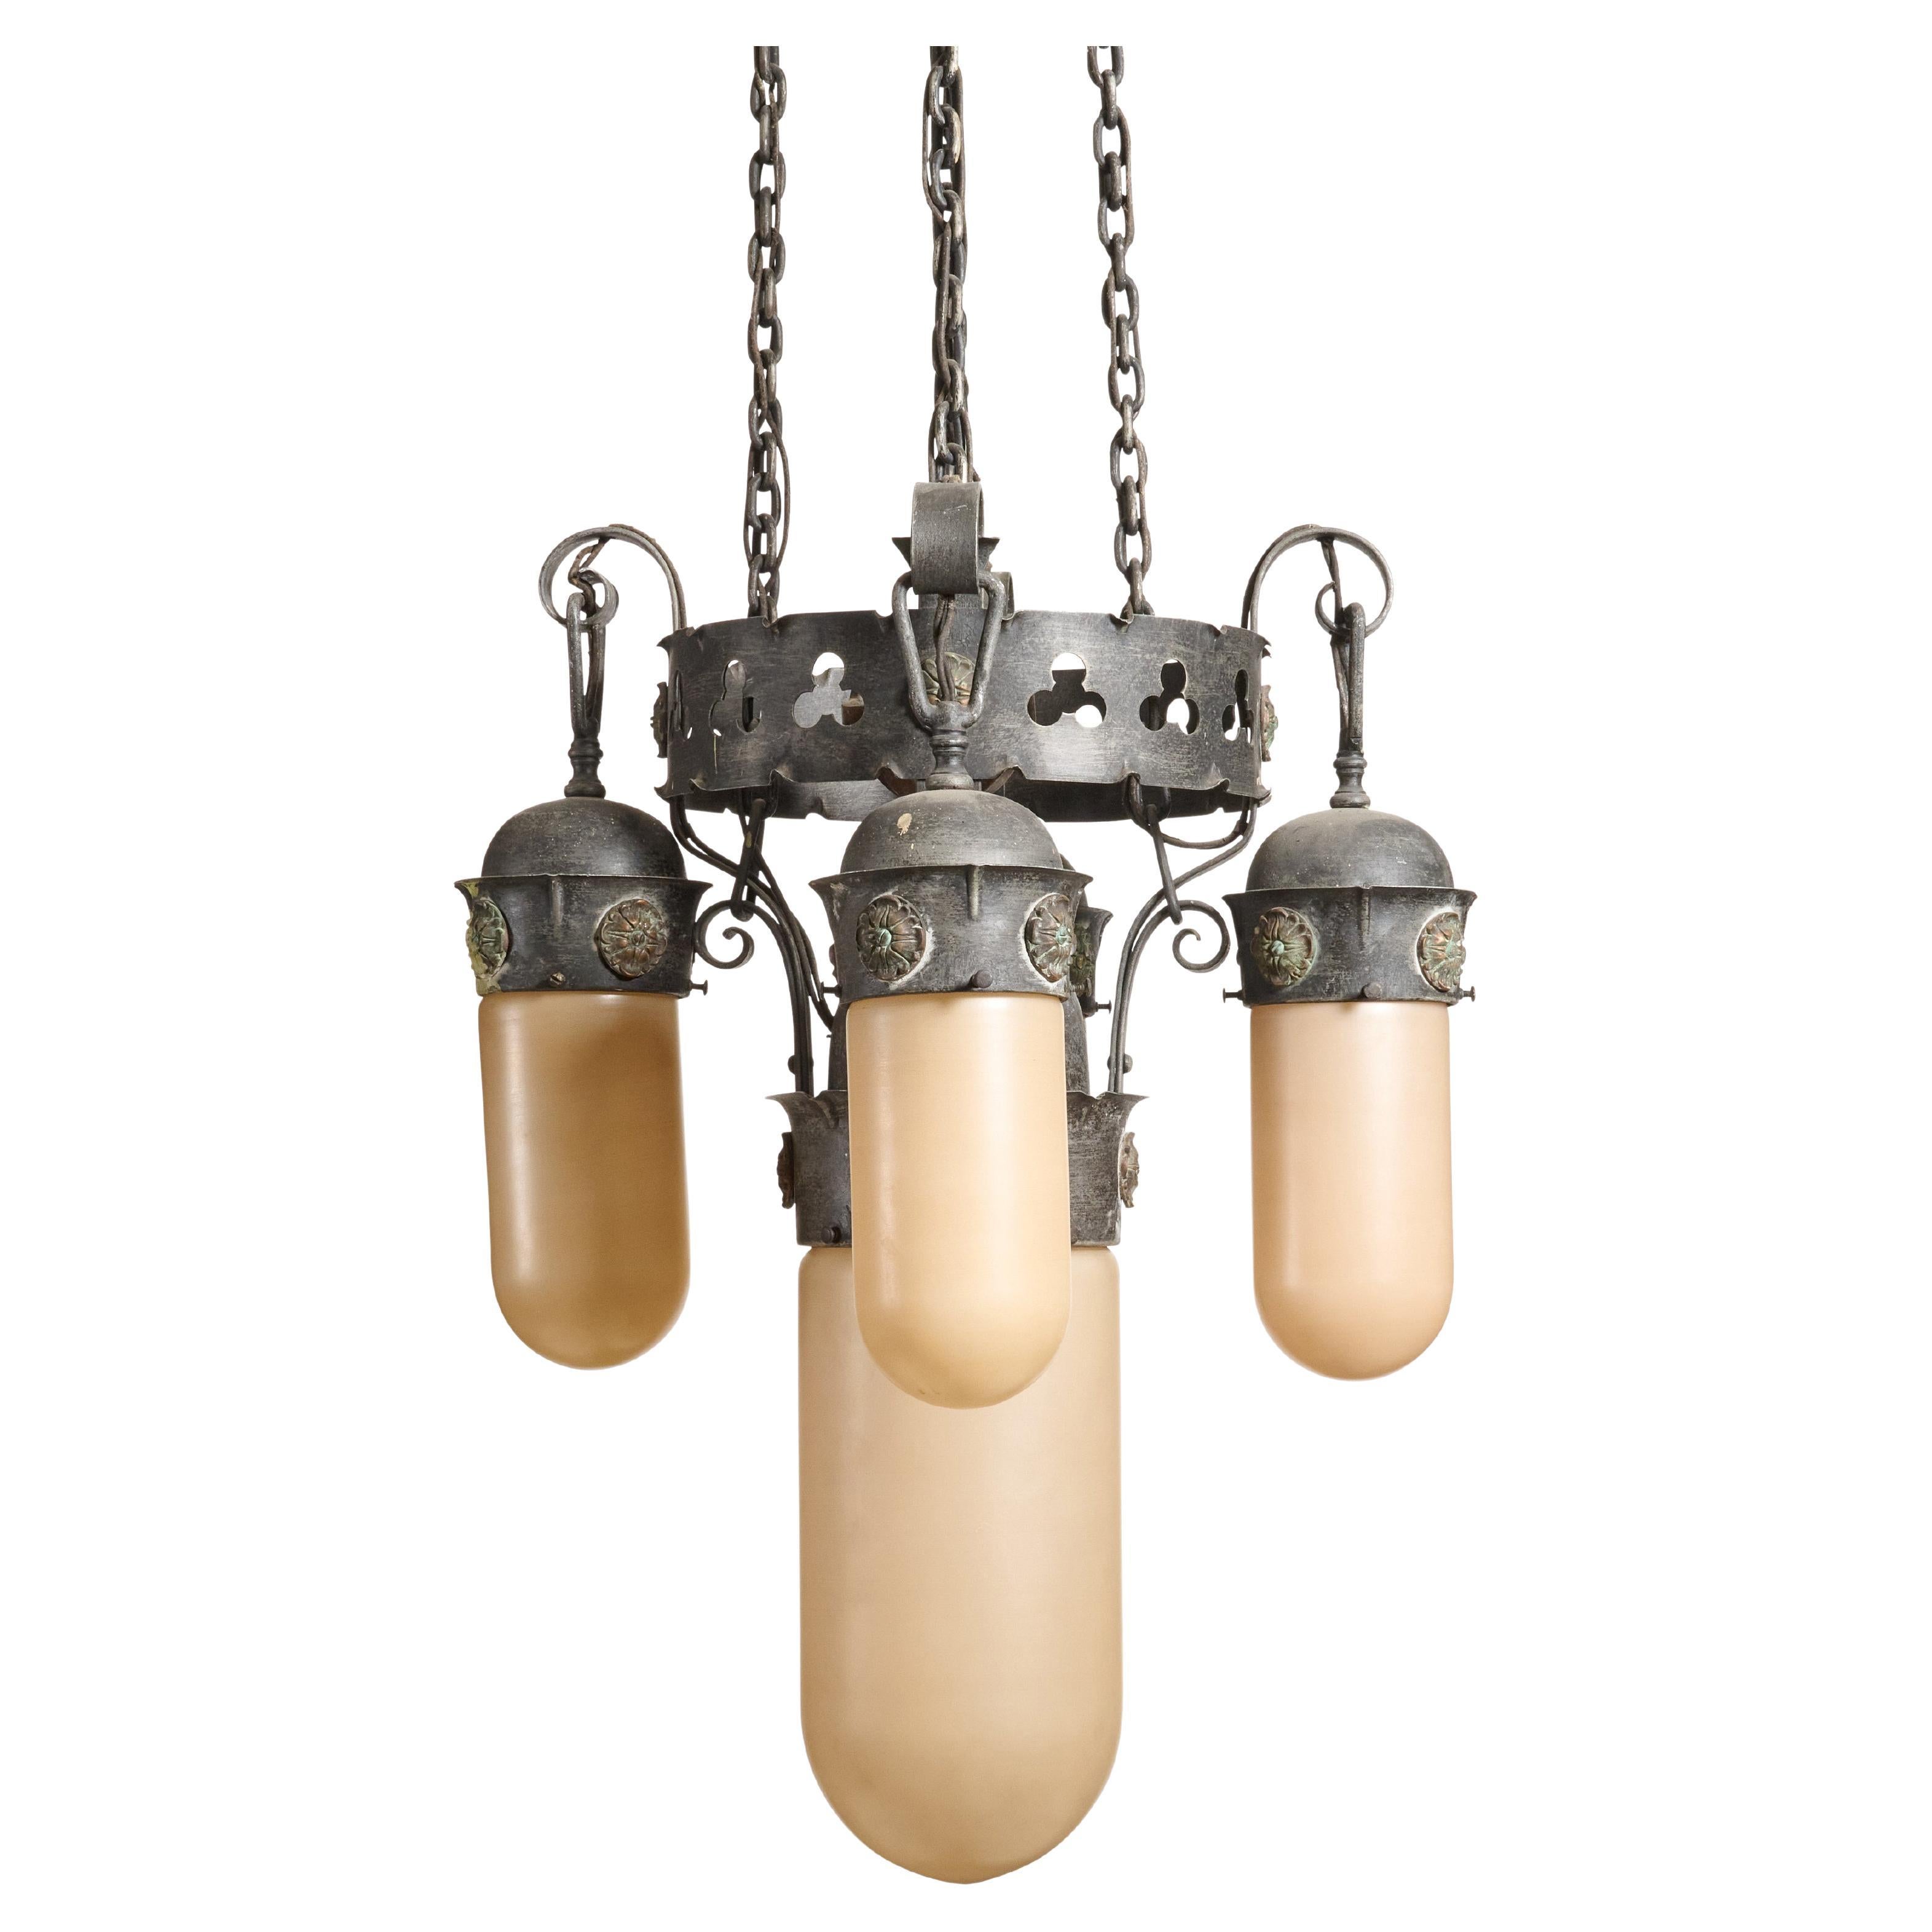 Wrought Iron Five Light Chandelier For Sale